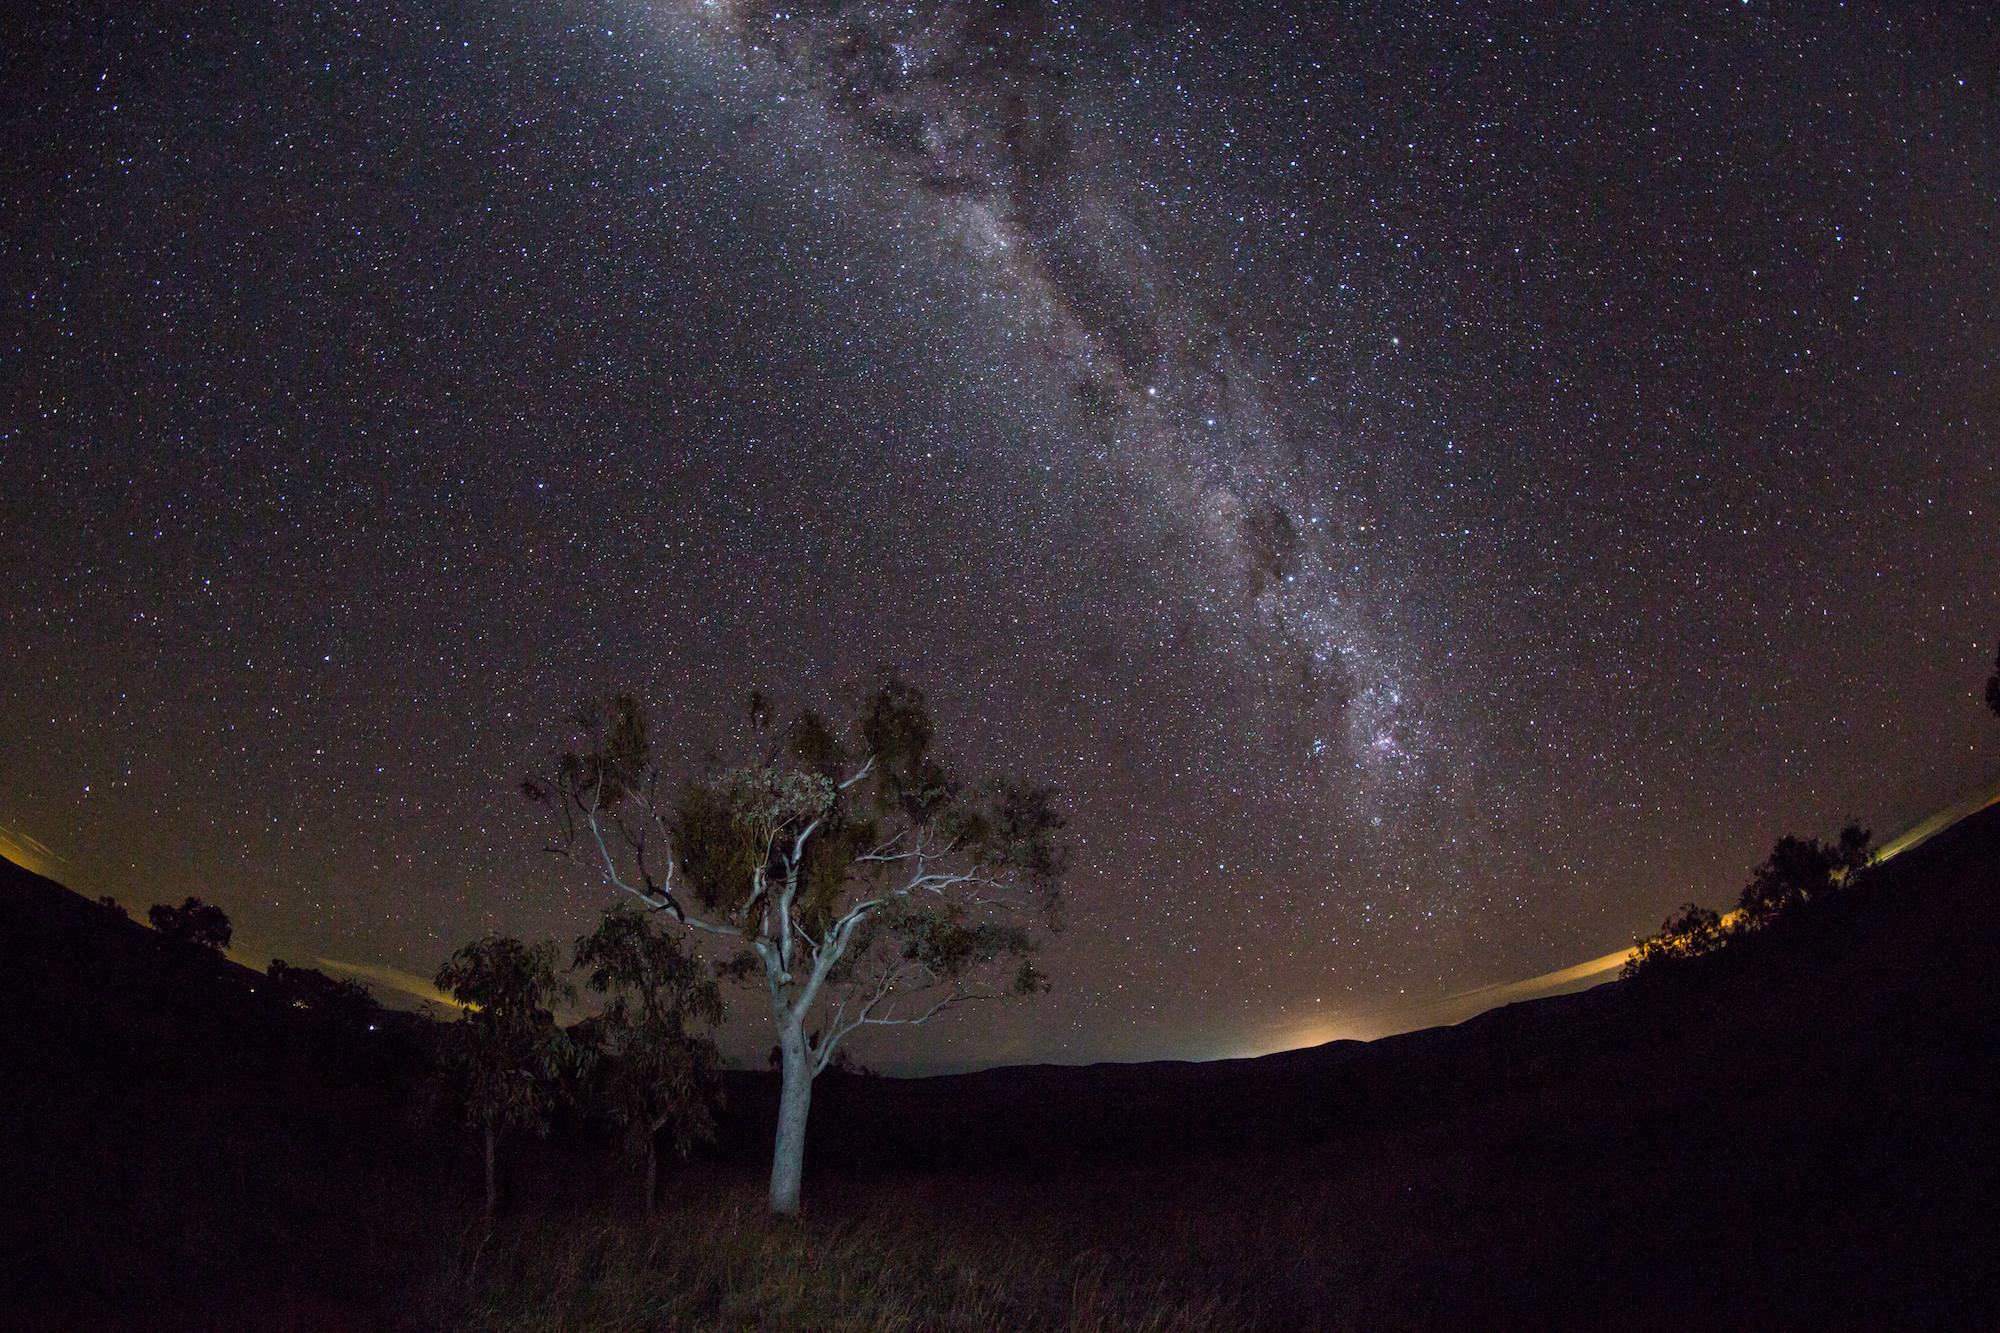 A snappy gum tree in the center of the photo. Above, a night sky full of stars